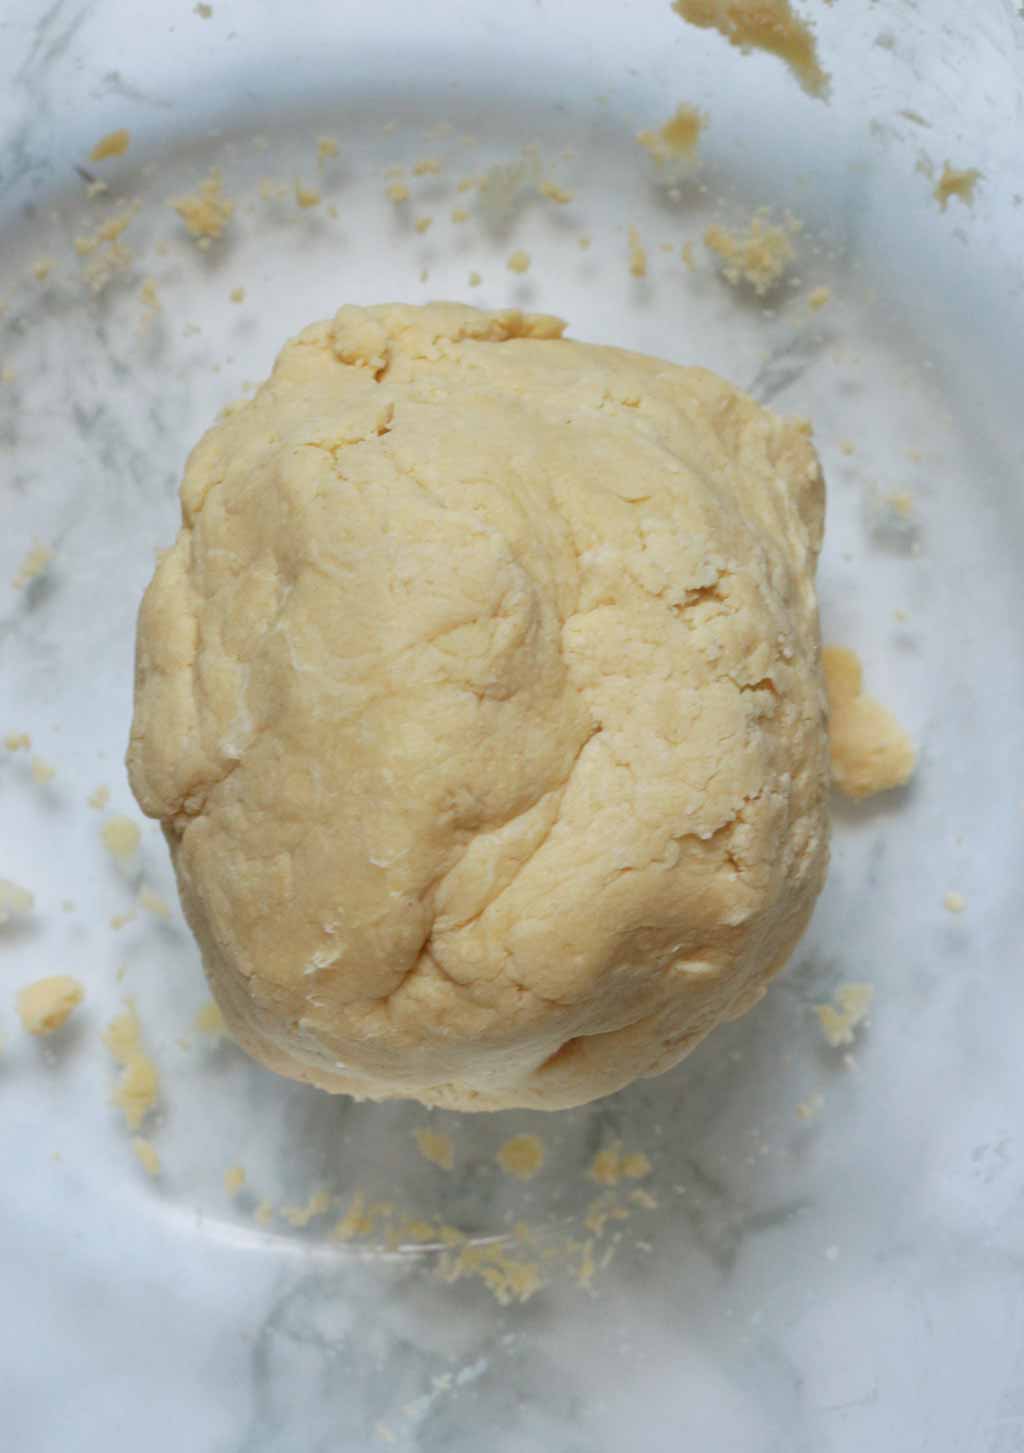 Ball Of Pastry Dough